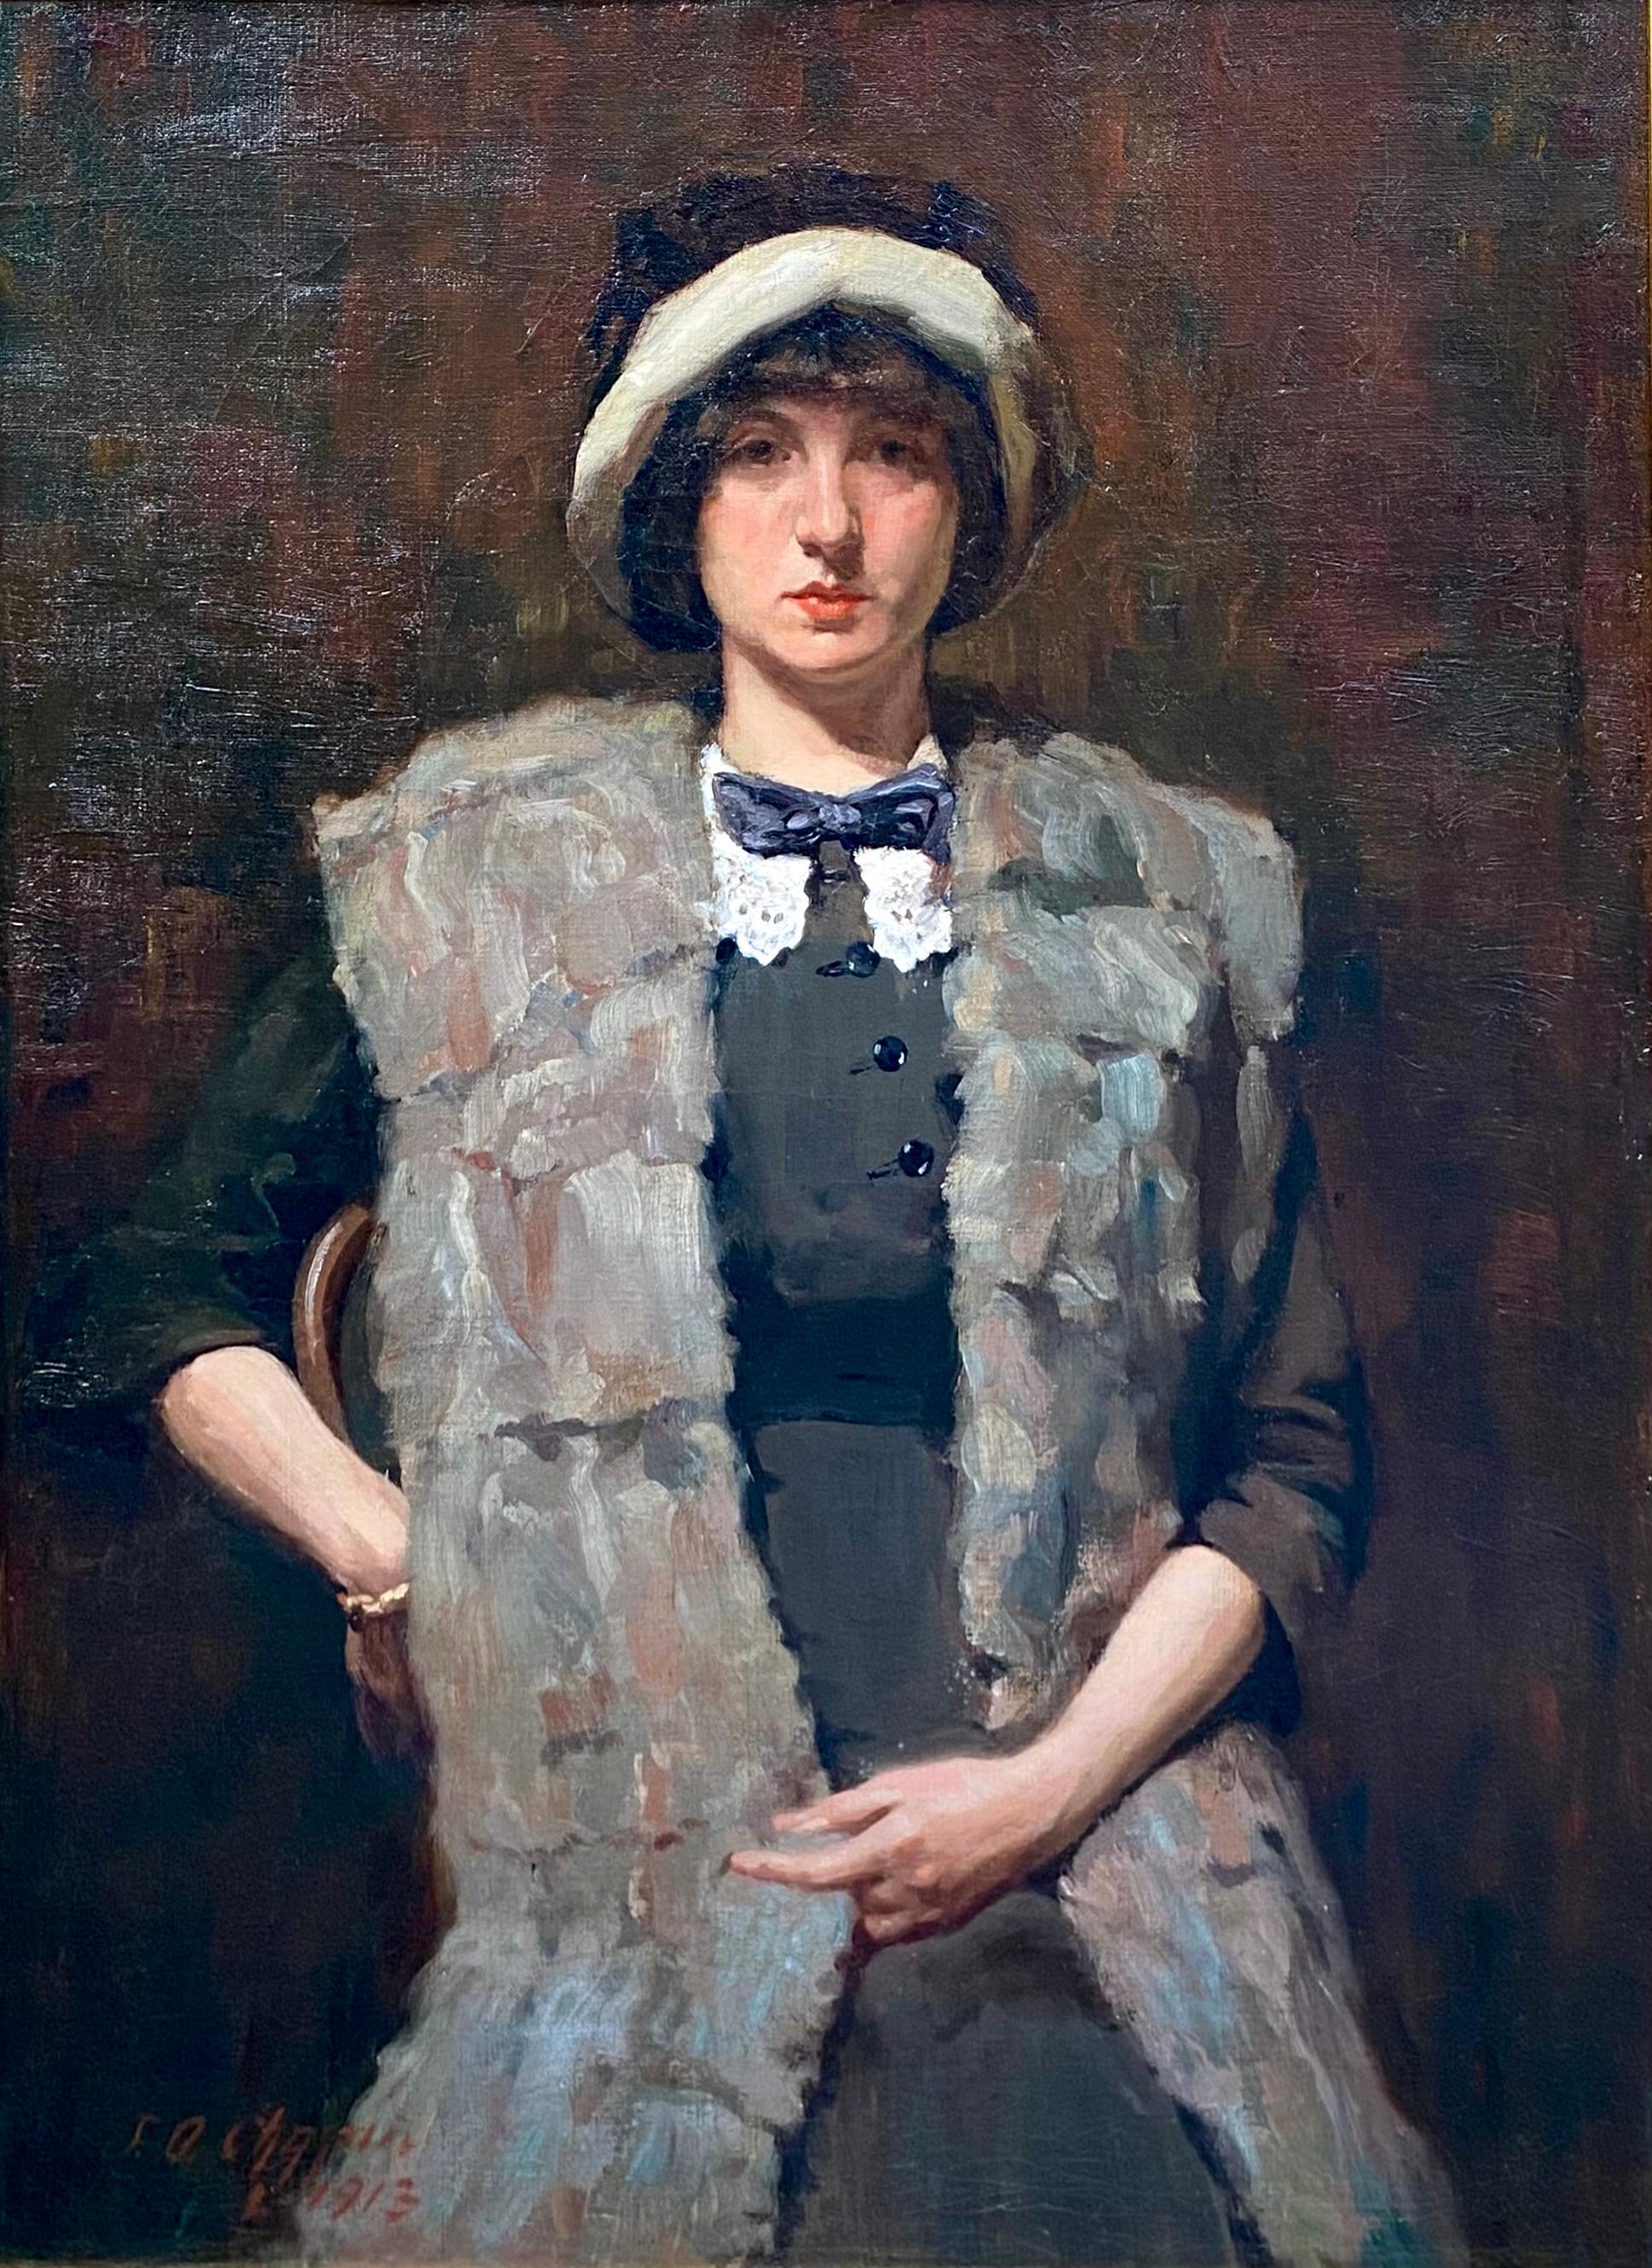 James Ormsbee Chapin
New Jersey 1887 – 1975 Toronto
American Painter

'Lady in a Fur Waistcoat'
Signature: Signed lower left and dated 1913
Medium: Oil on canvas
Dimensions: Image size 100 x 75 cm, frame size 117 x 92 cm

Biography: Chapin James